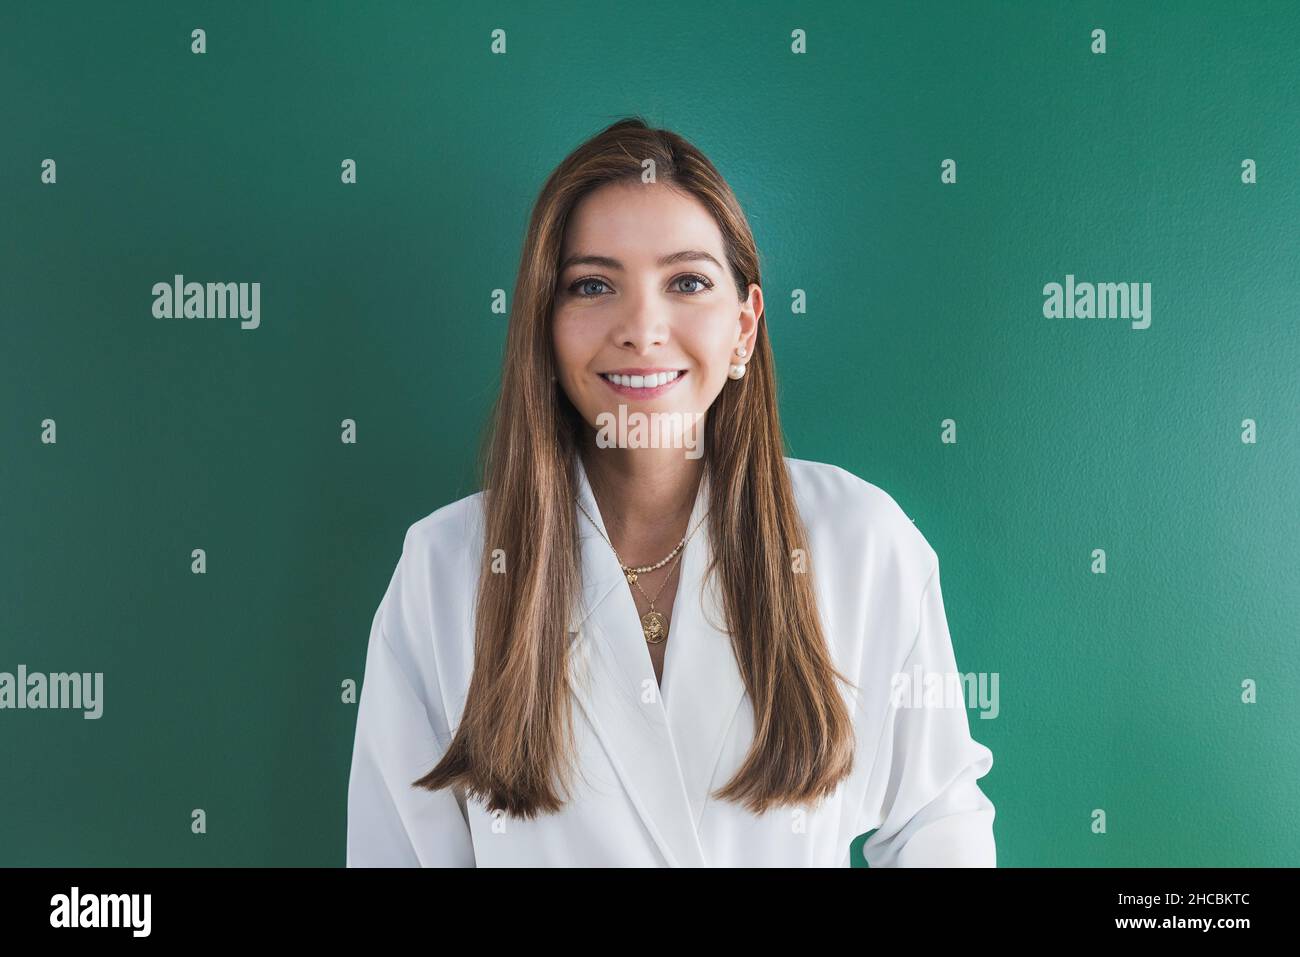 Beautiful woman with brown hair against green background Stock Photo